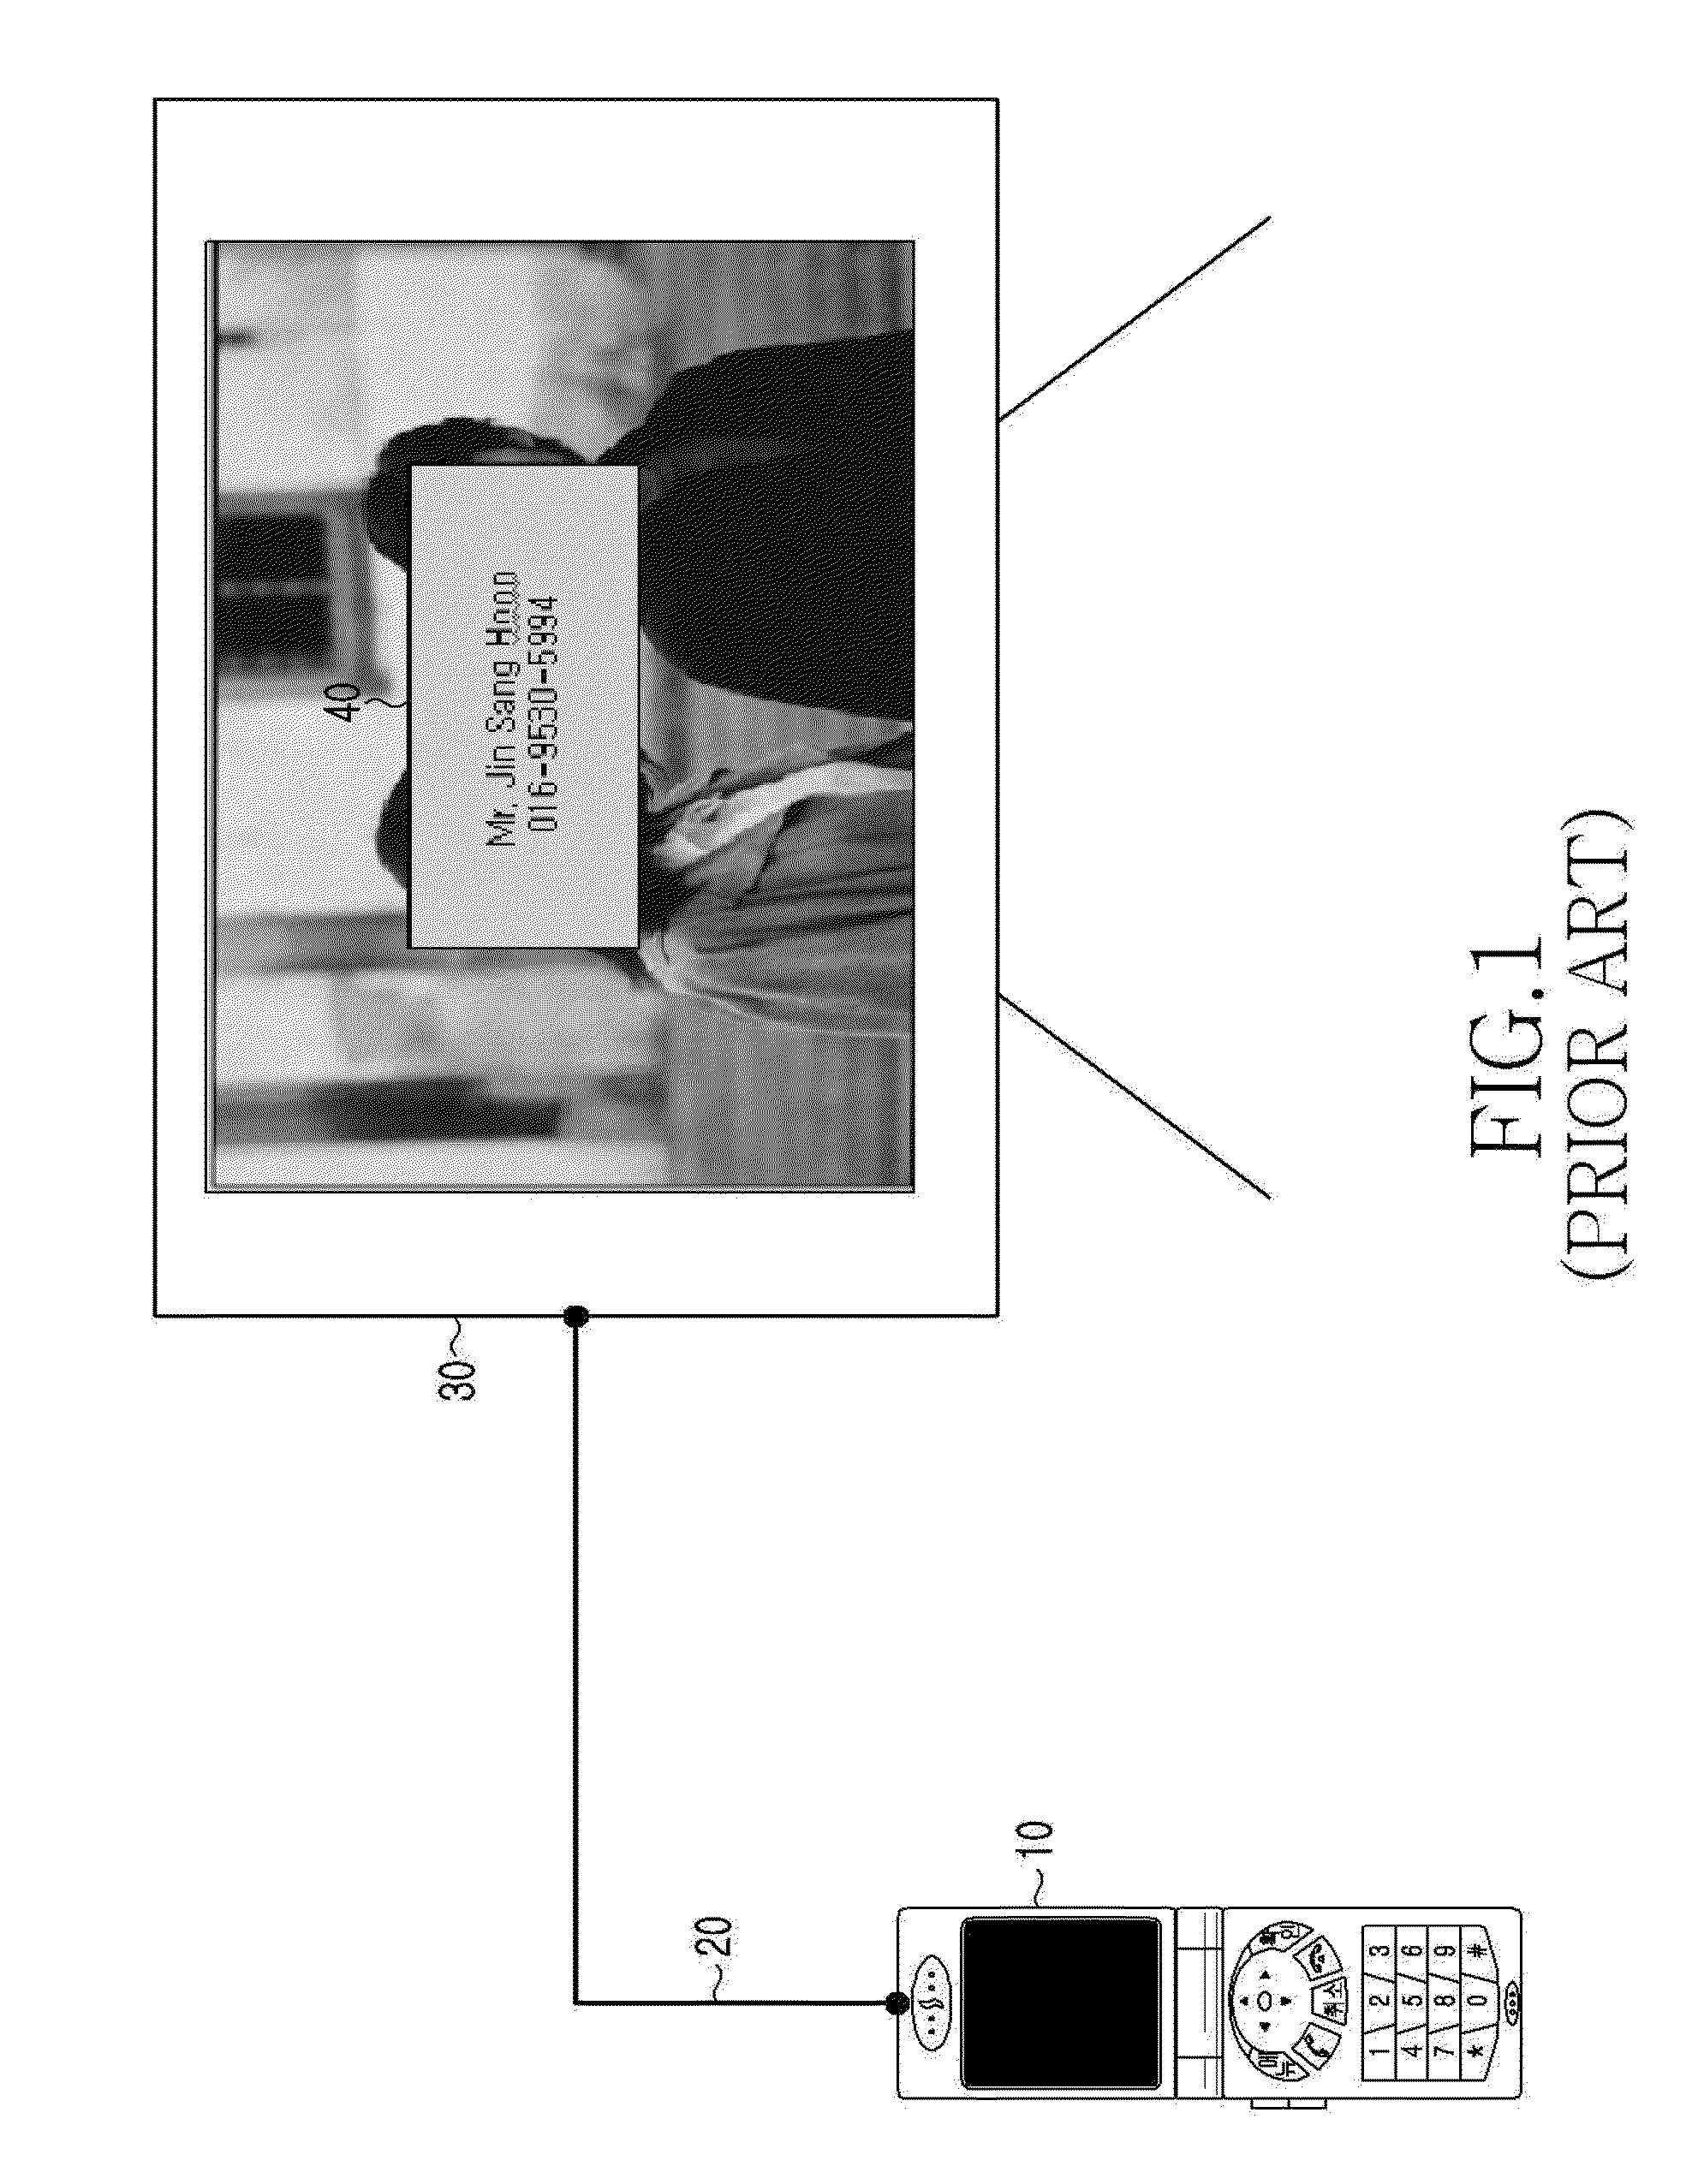 Display control apparatus and method in a mobile terminal capable of outputting video data to an external display device